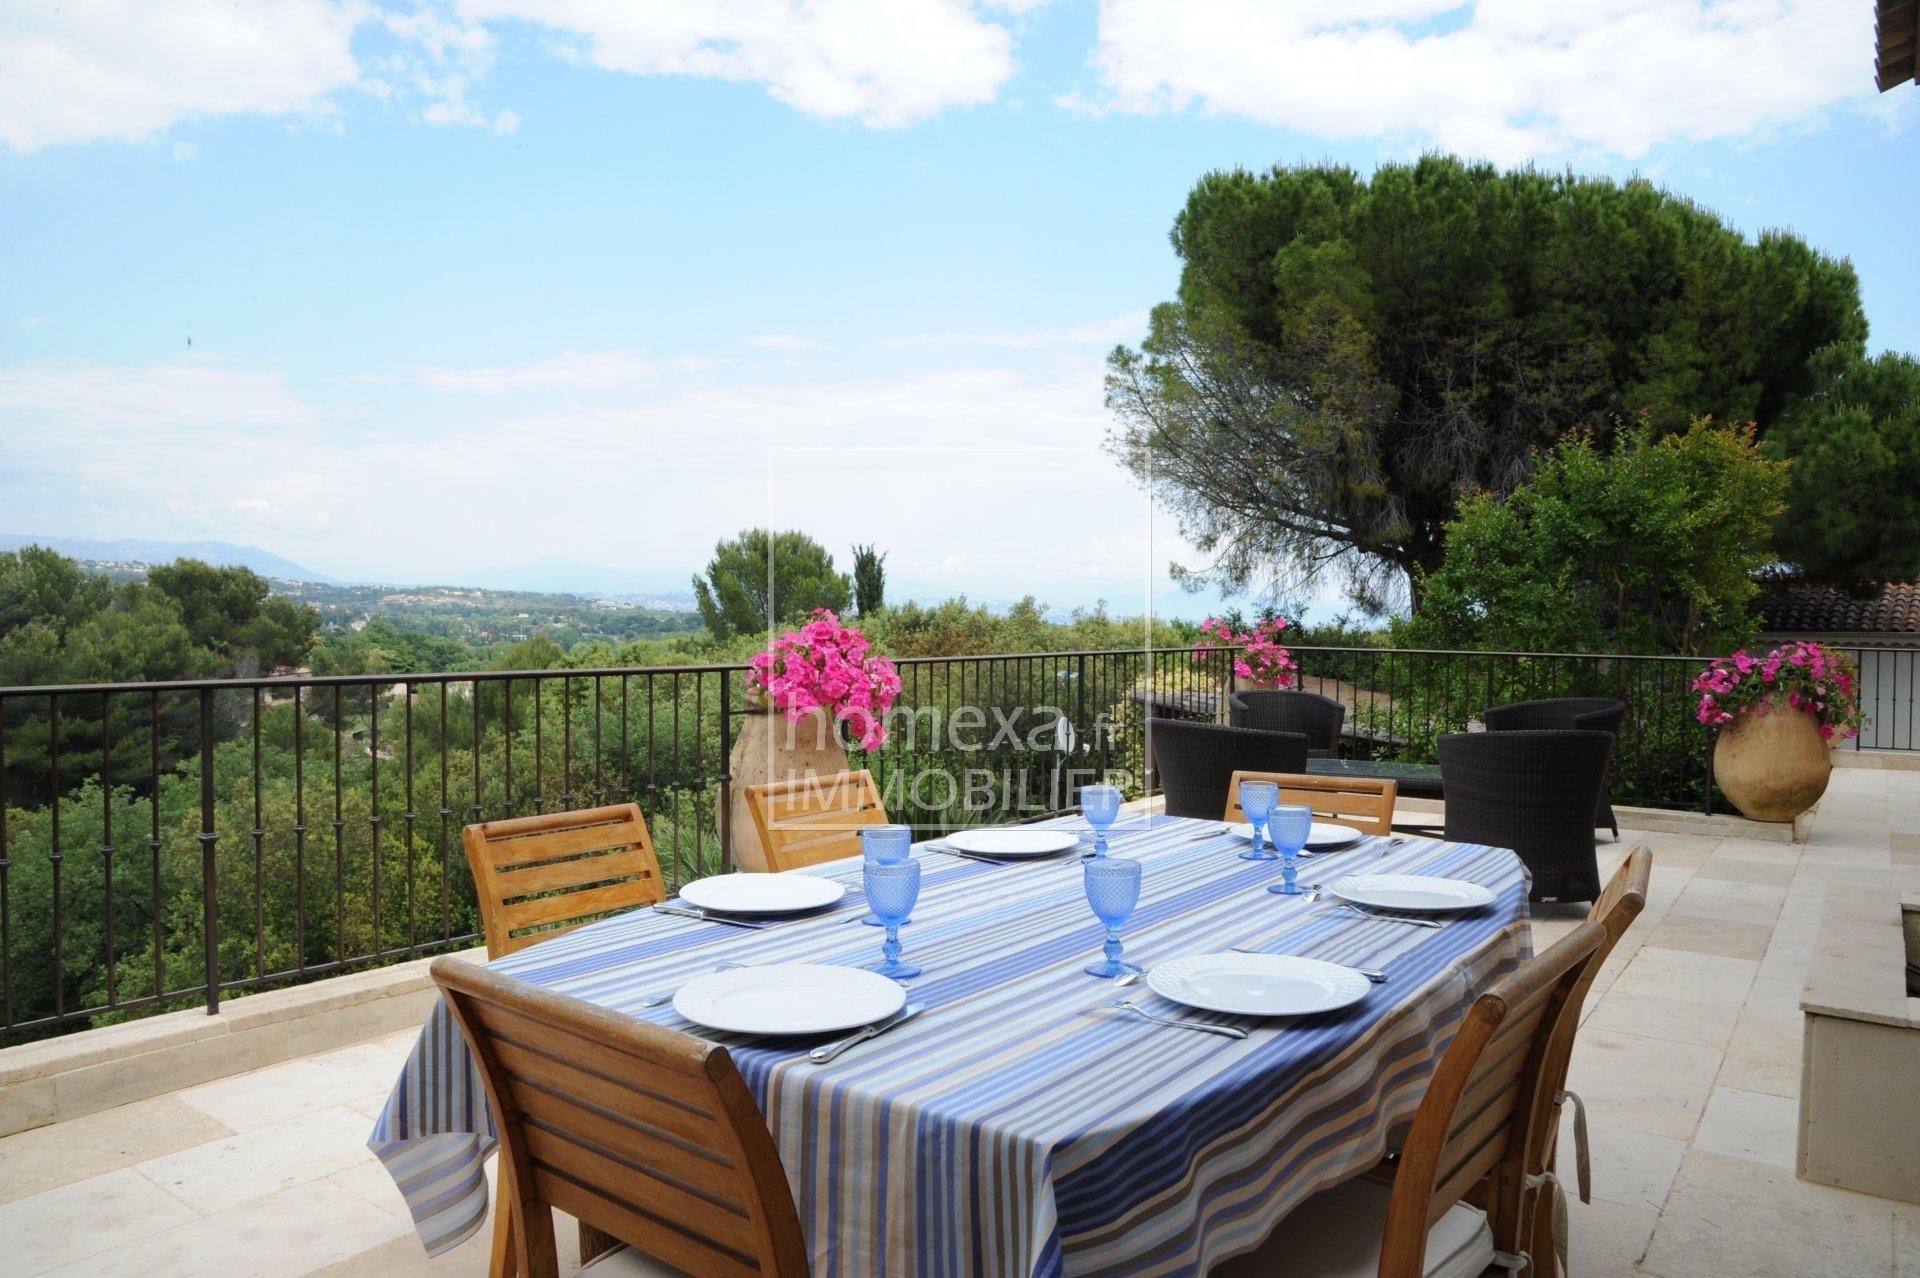 Property management in Antibes : Terrace view